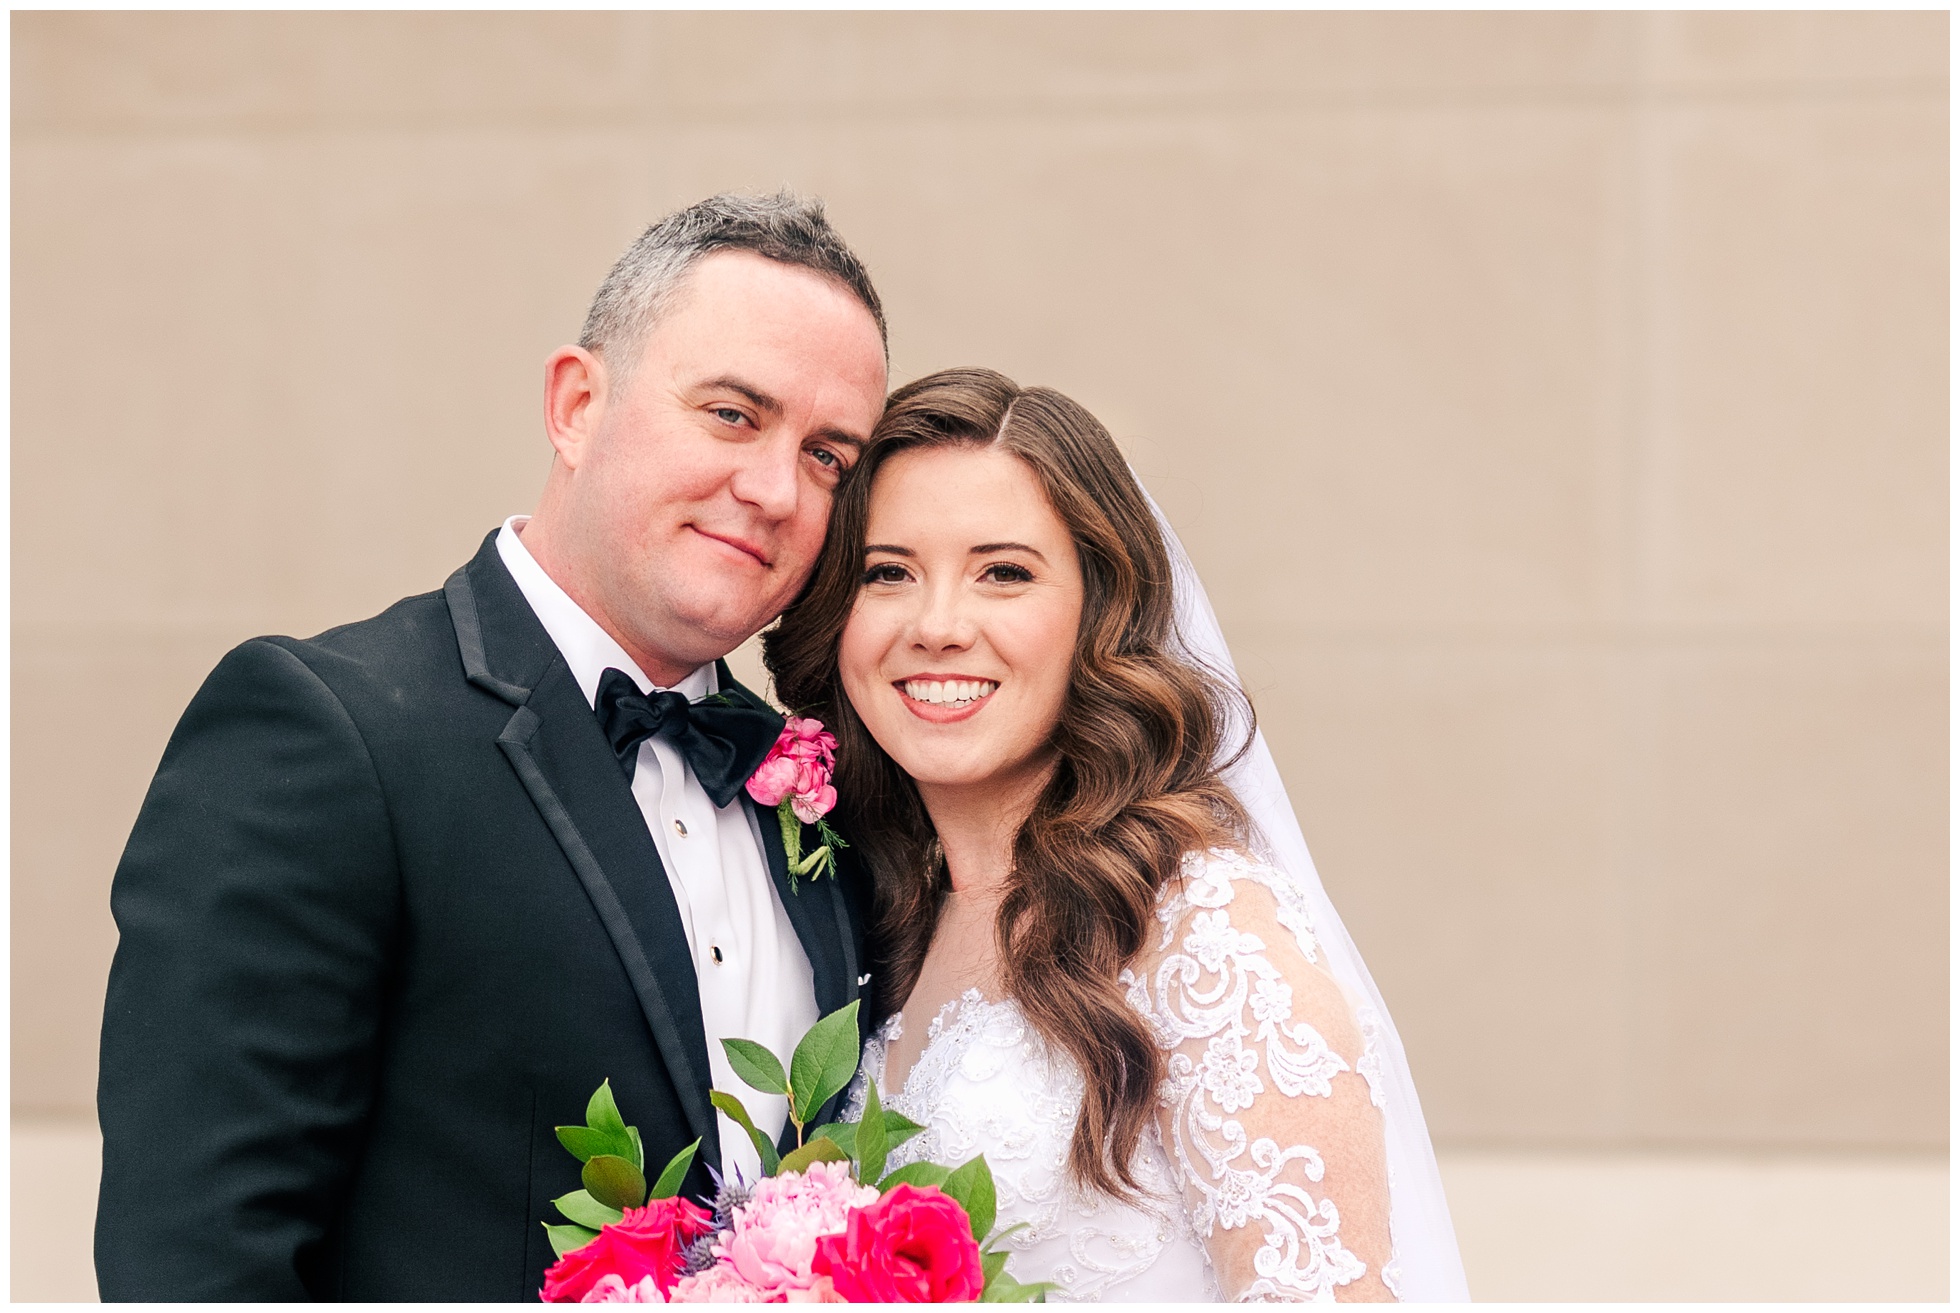 Bride and Groom Portrait with bright pink flowers